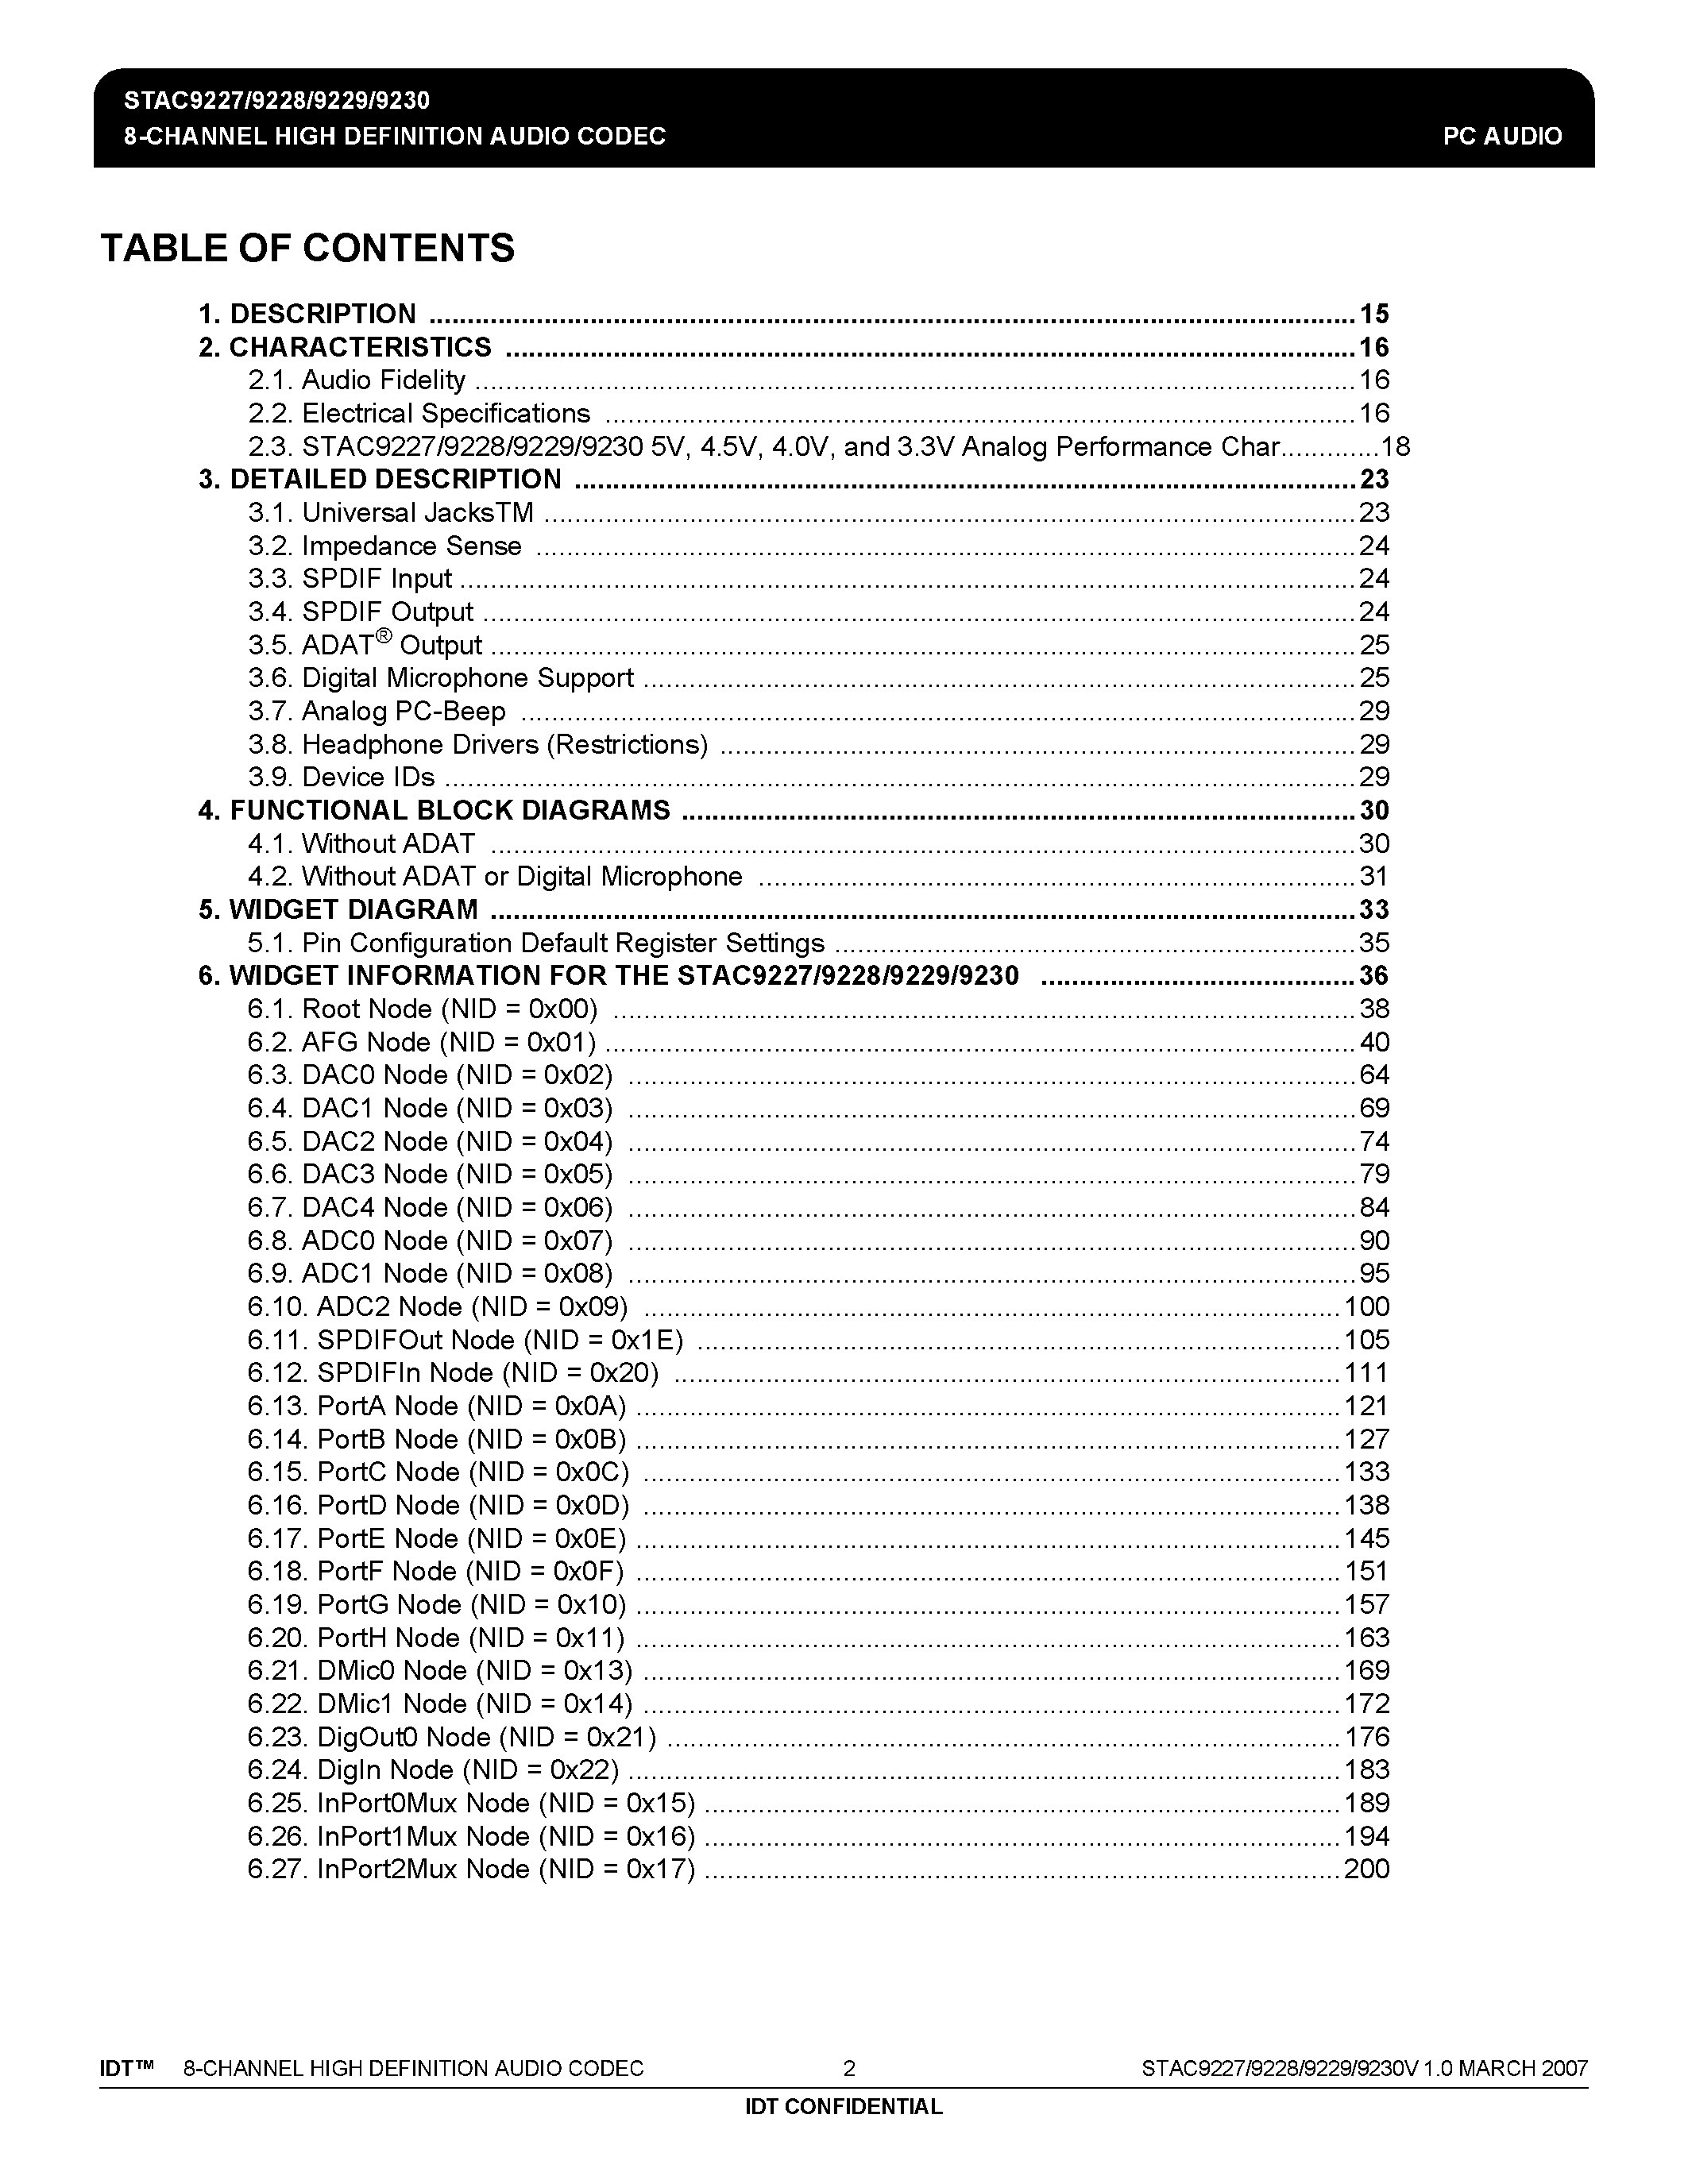 Datasheet STAC9227 - (STAC9227 - STAC9230) 8-CHANNEL HIGH DEFINITION AUDIO CODEC page 2